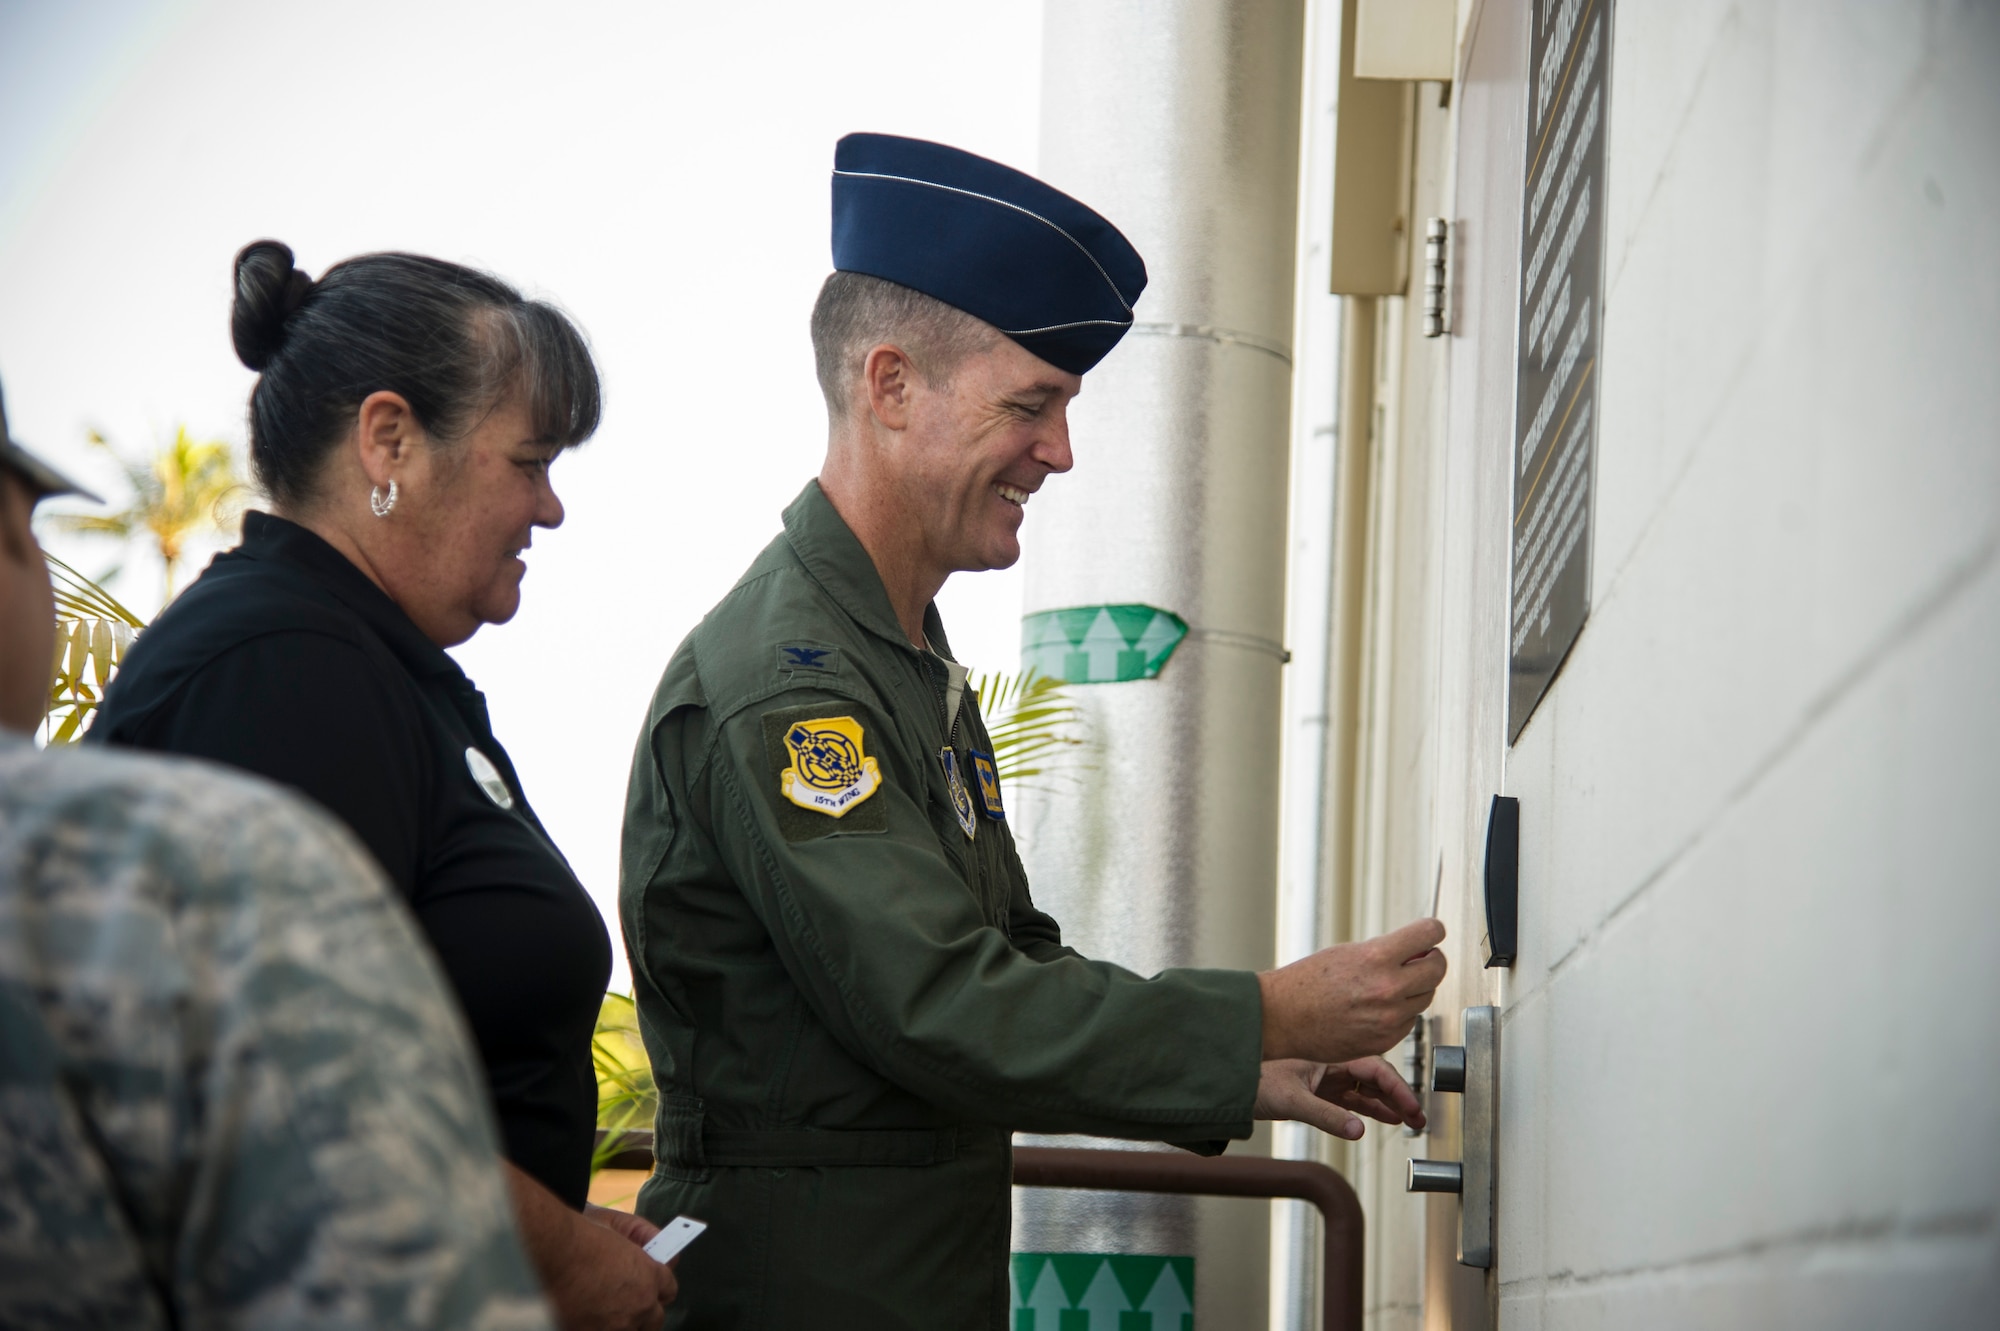 Col. Kevin Gordon, 15th Wing commander, and Dawn Pierce, Hickam Gym manager, use the 24/7 entry during the ribbon cutting of the Hickam Memorial Gym, Joint Base Pearl Harbor-Hickam, Hawaii, Nov. 20, 2017. The gym’s 24-hour access is available to all authorized users over the age of 18. Individuals who do not have a common access card may purchase a proximity card for a nominal fee. (U.S. Air Force photo by Tech. Sgt. Heather Redman)